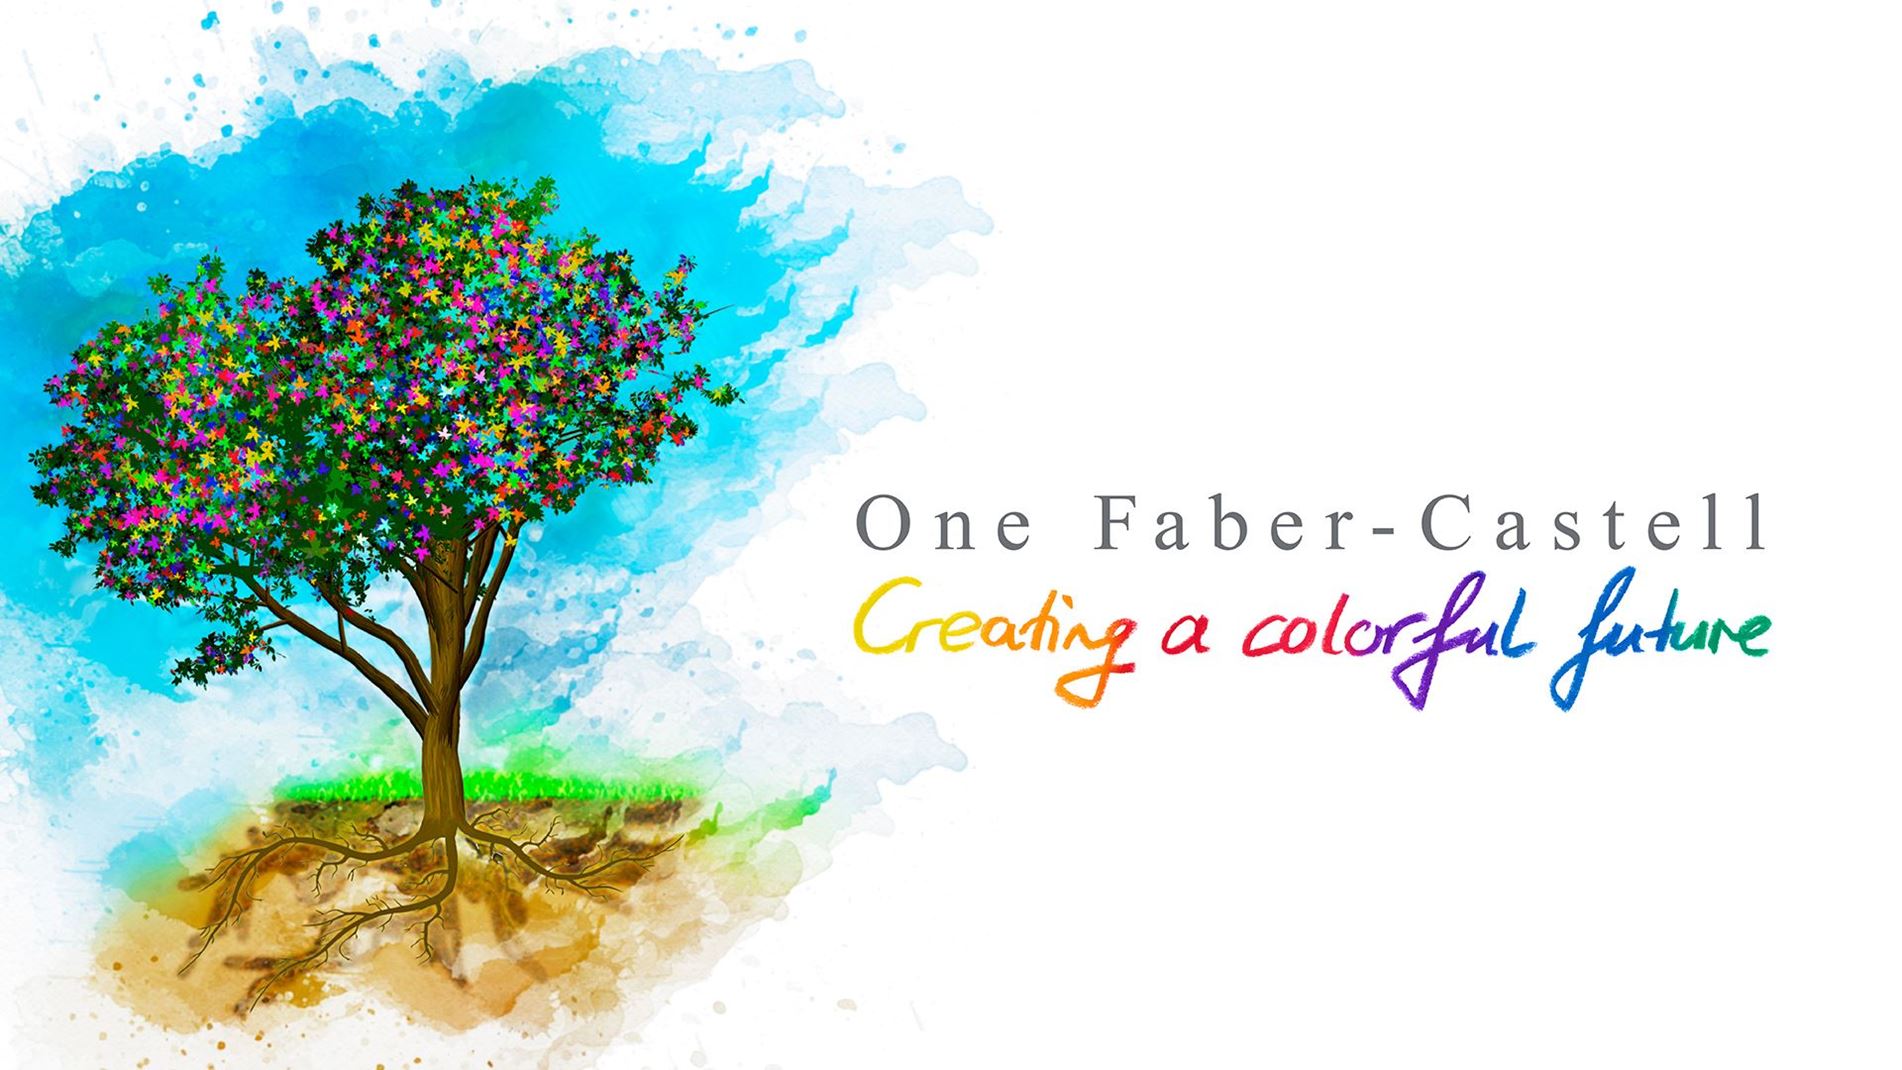 Tree with lettering "One Faber-Castell - Creating a colorful future"